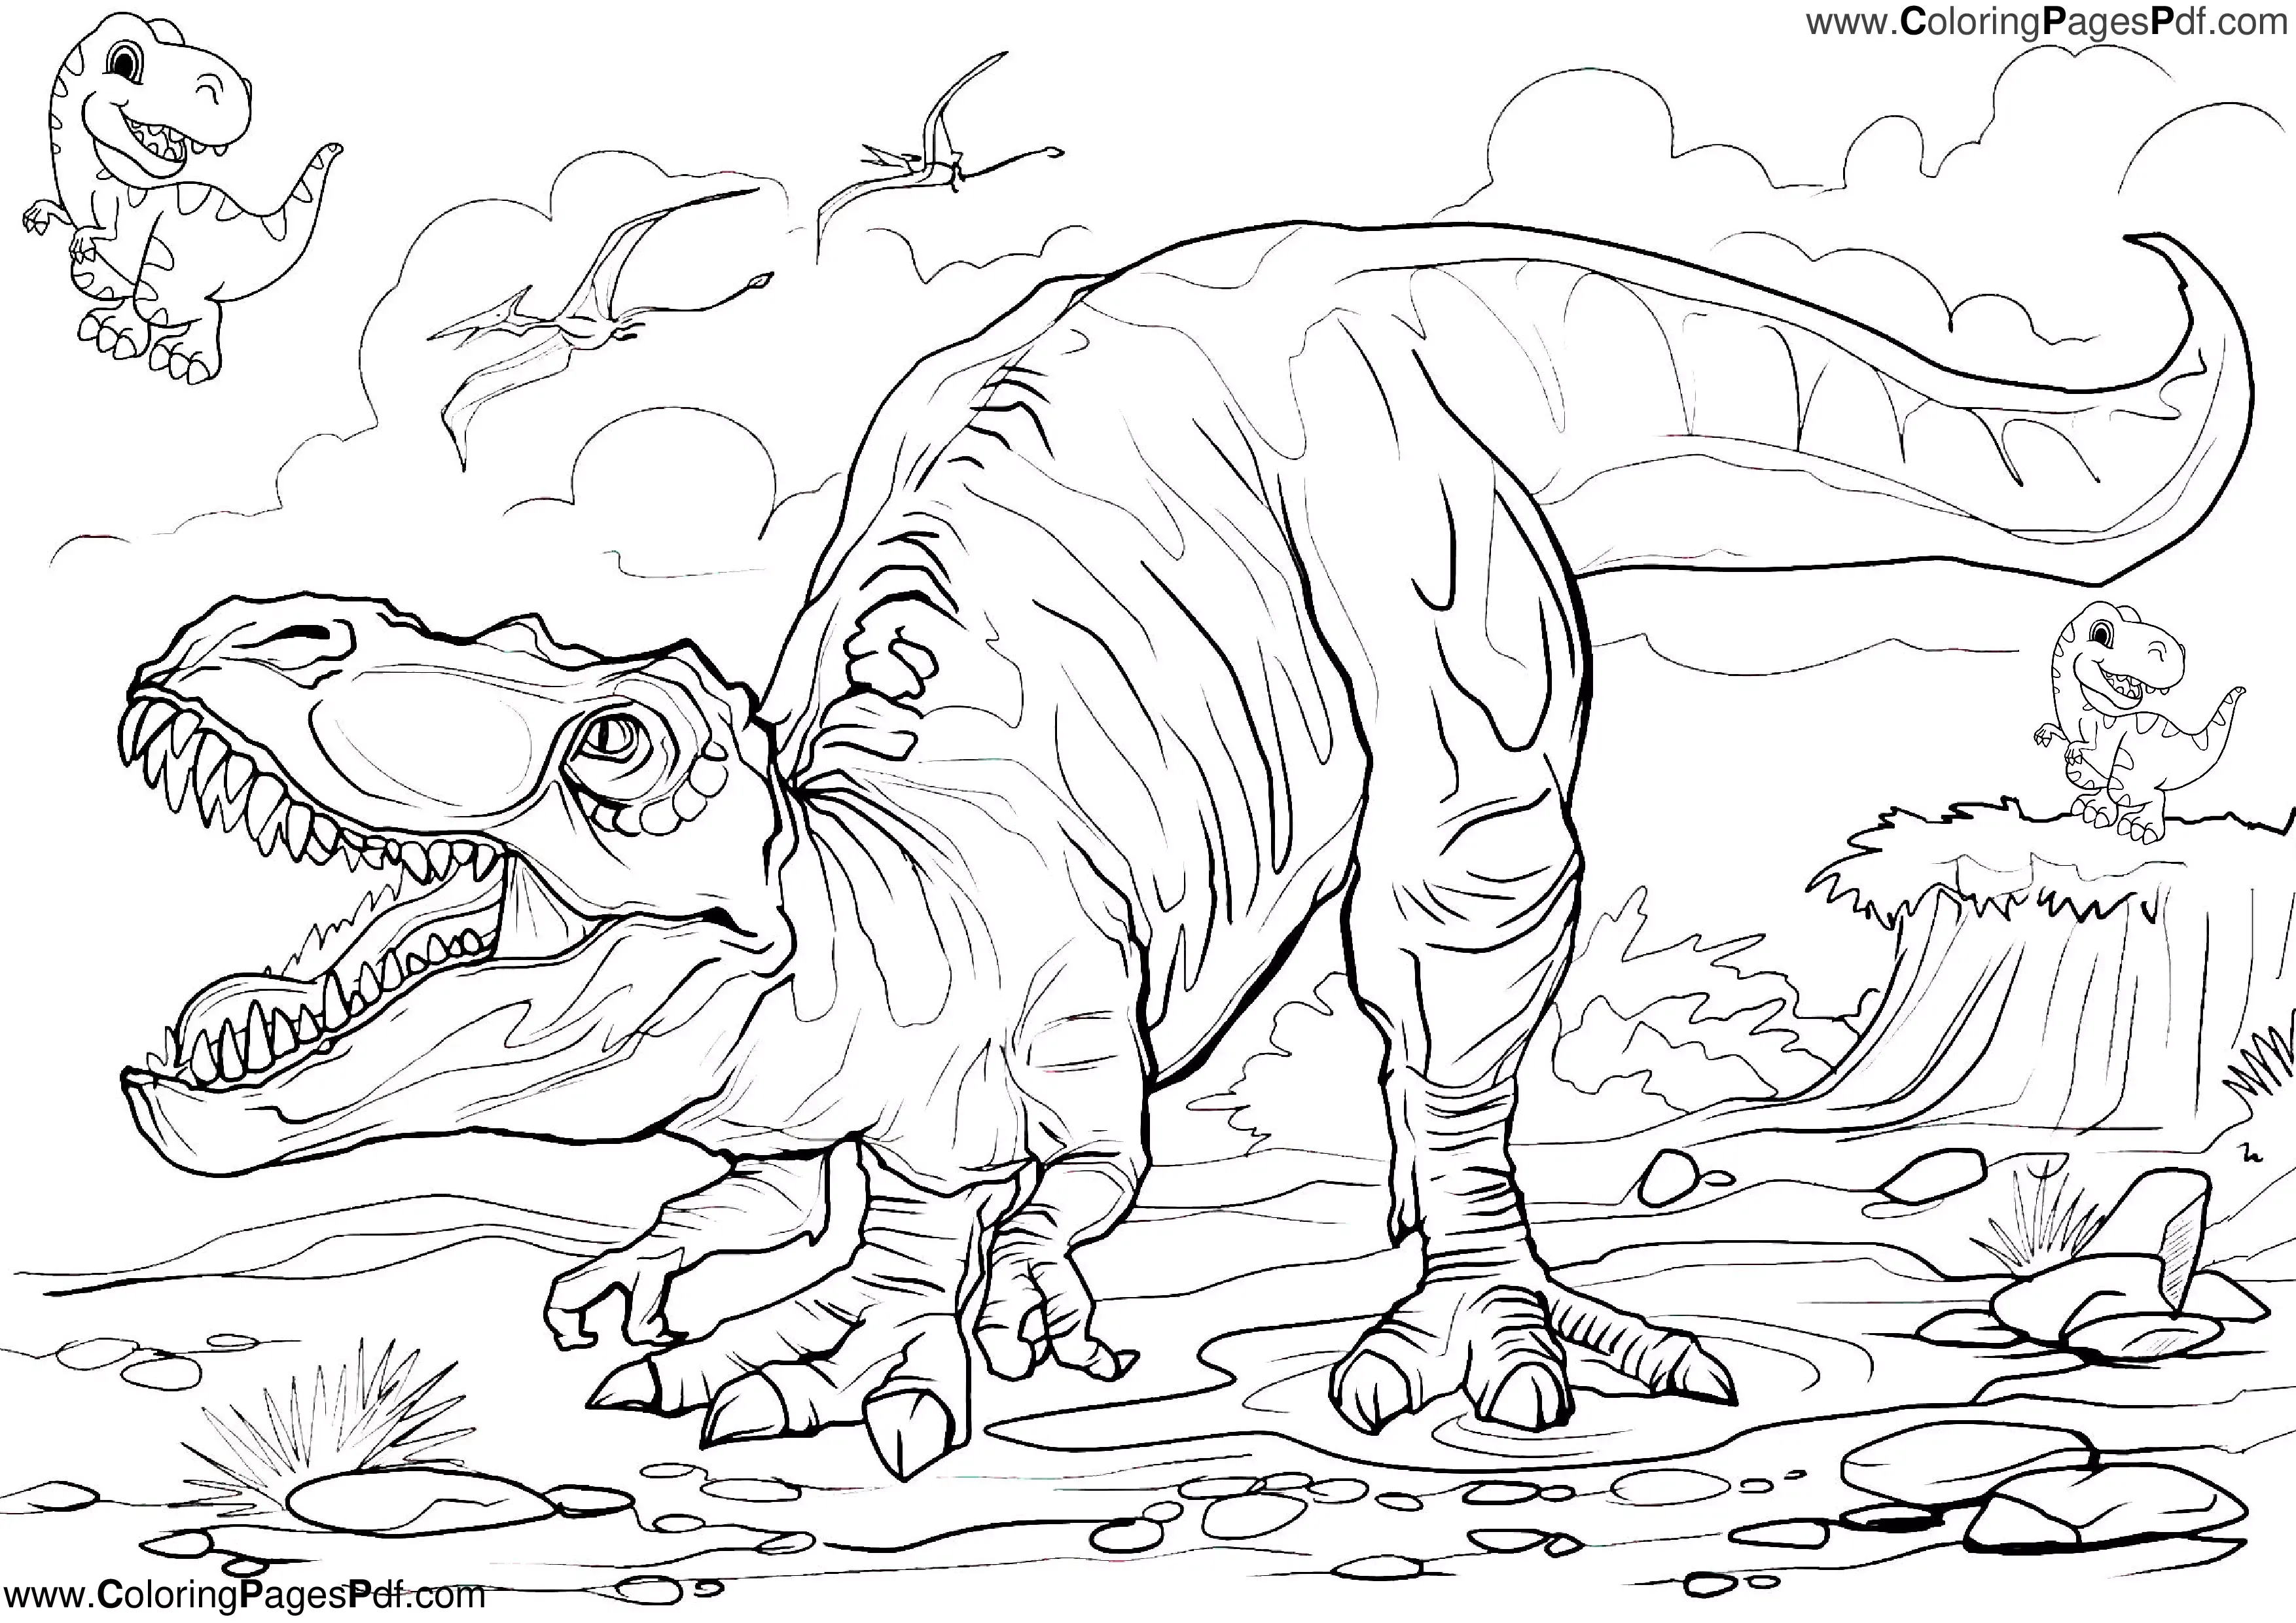 Free dinosaur coloring pages